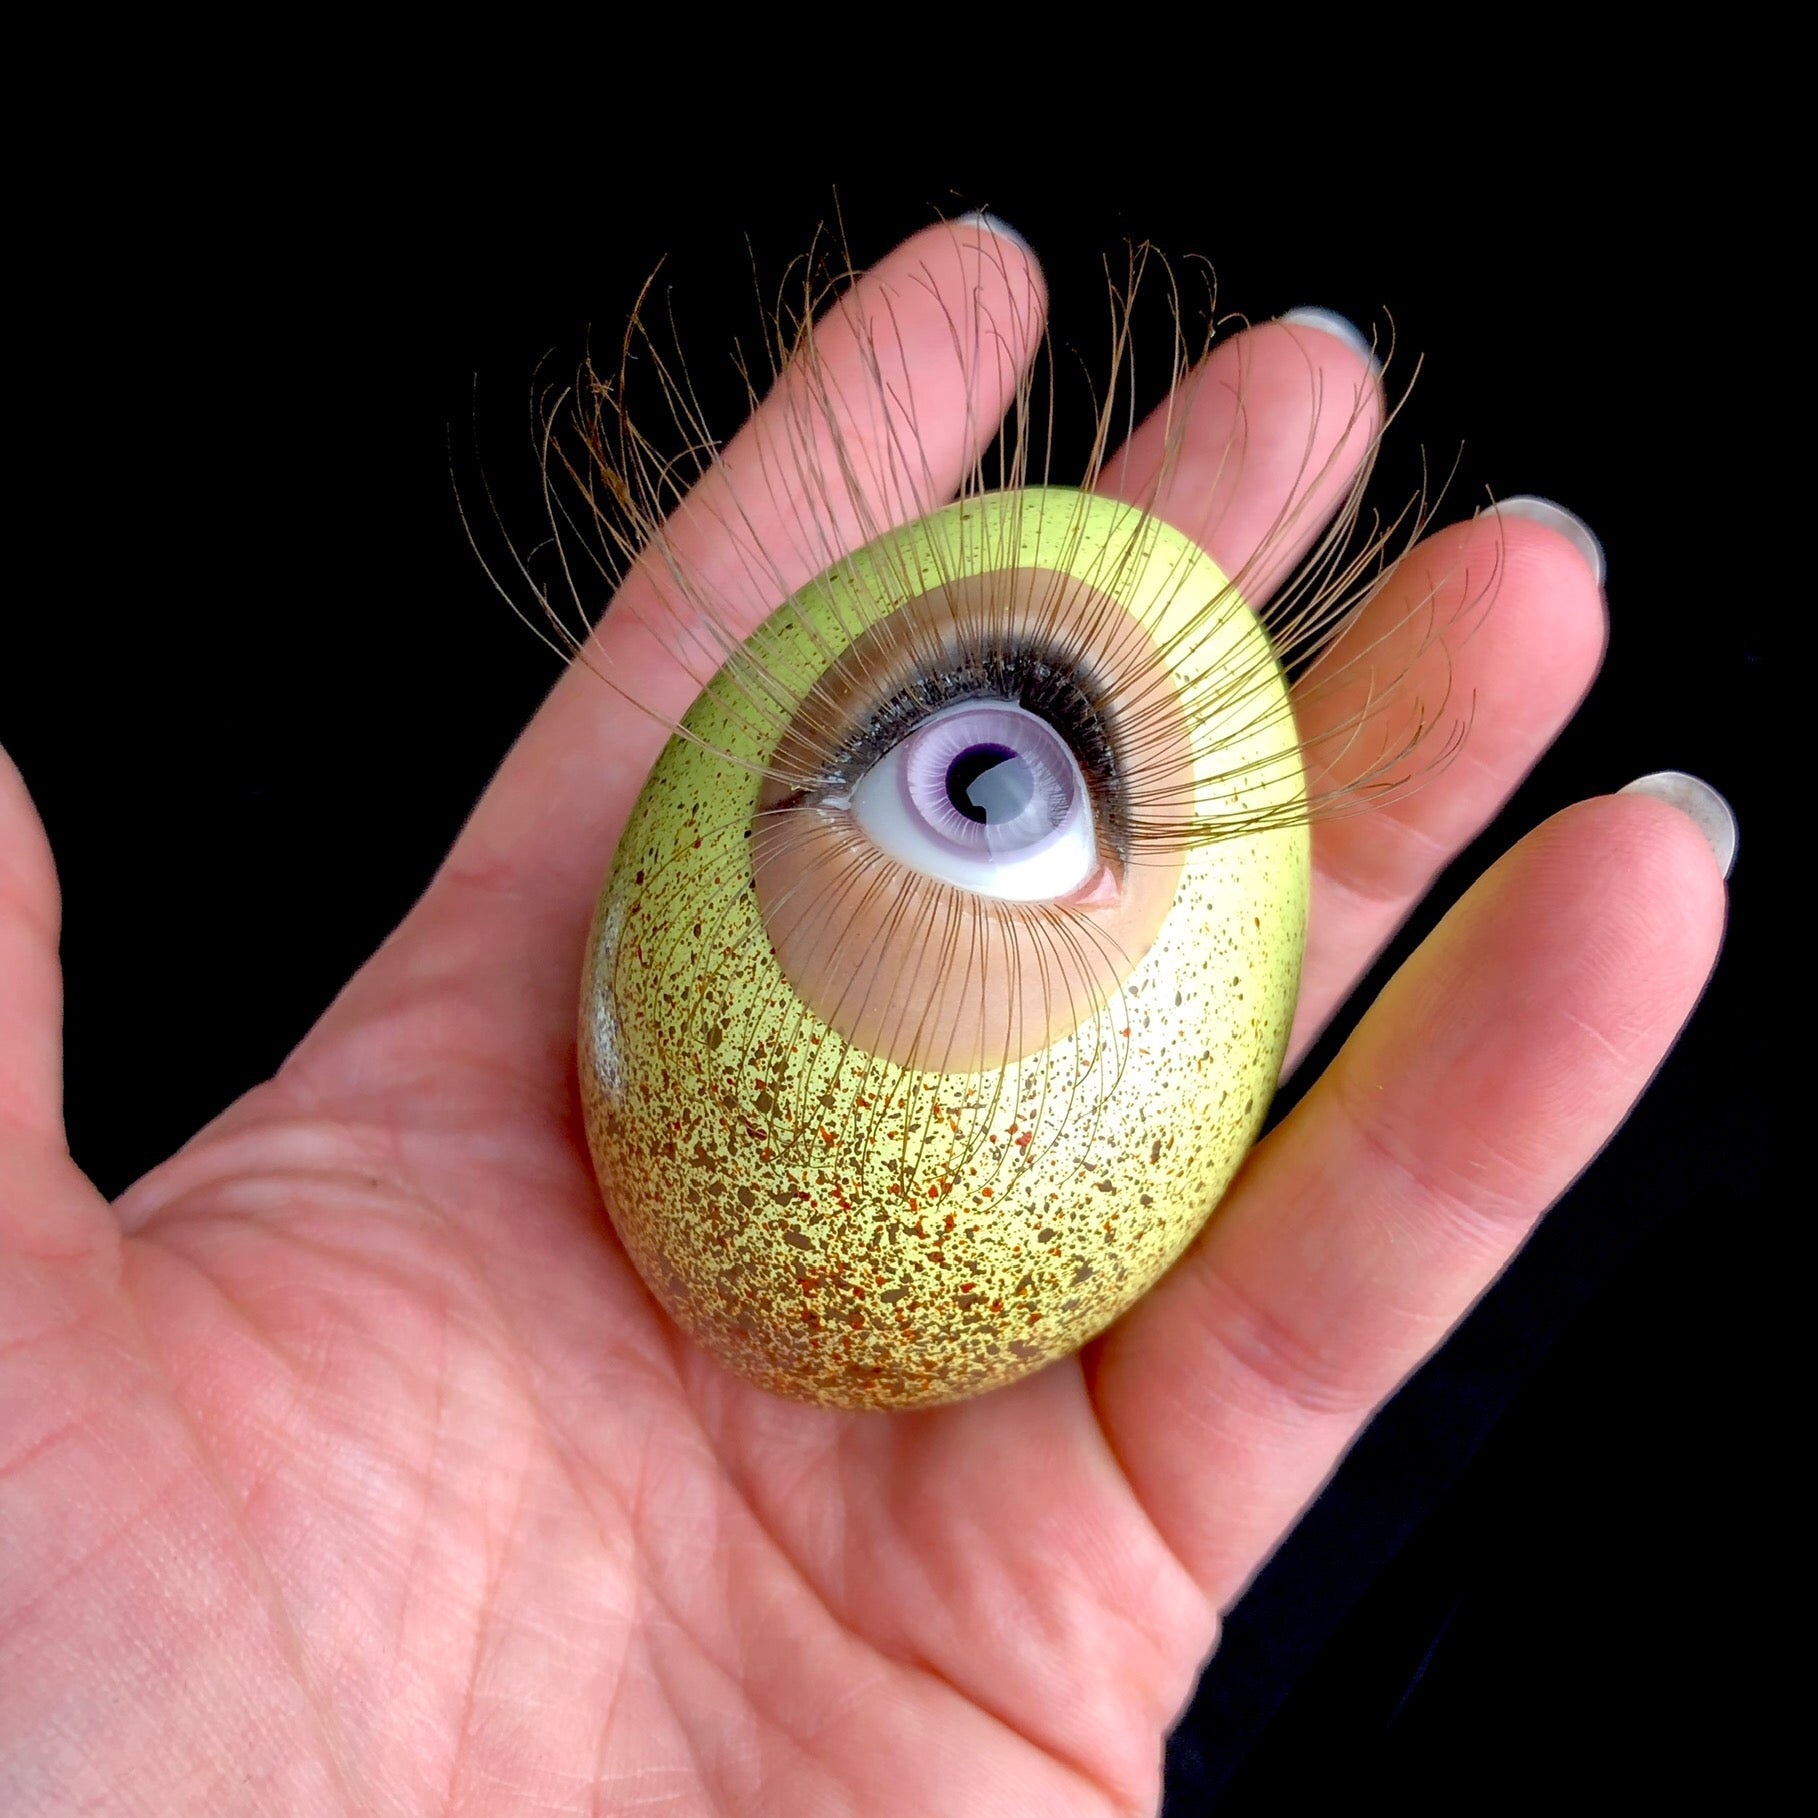 Verona the Chicken Egg with purple eye and brown lashes shown in hand